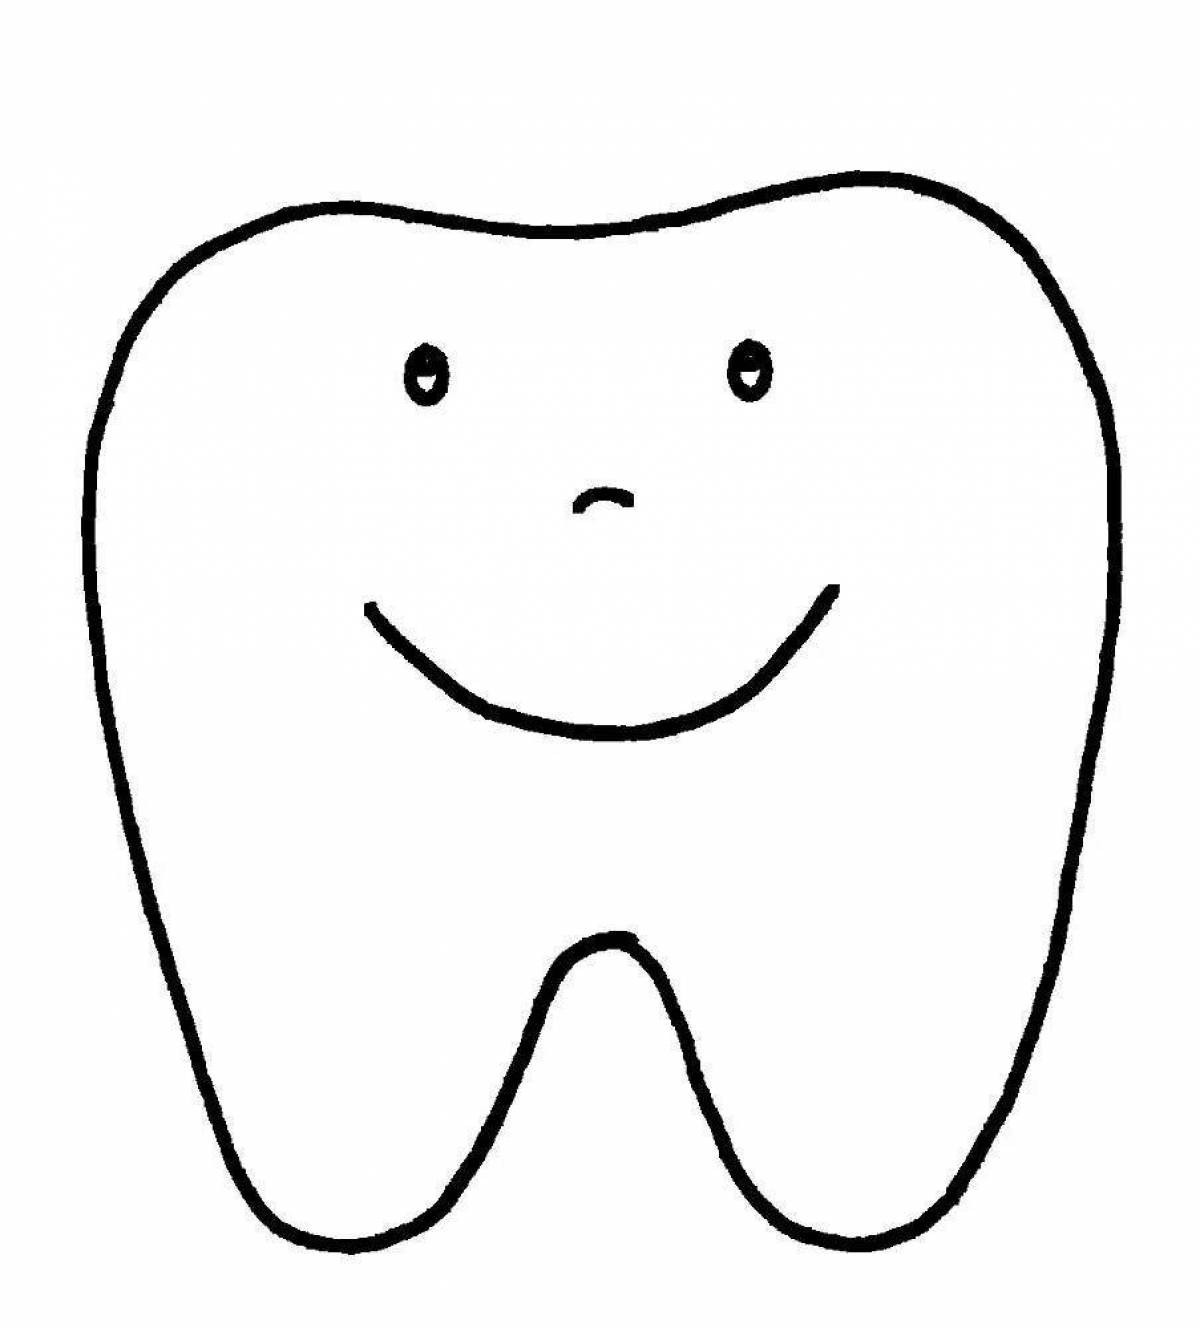 Brilliant tooth coloring page